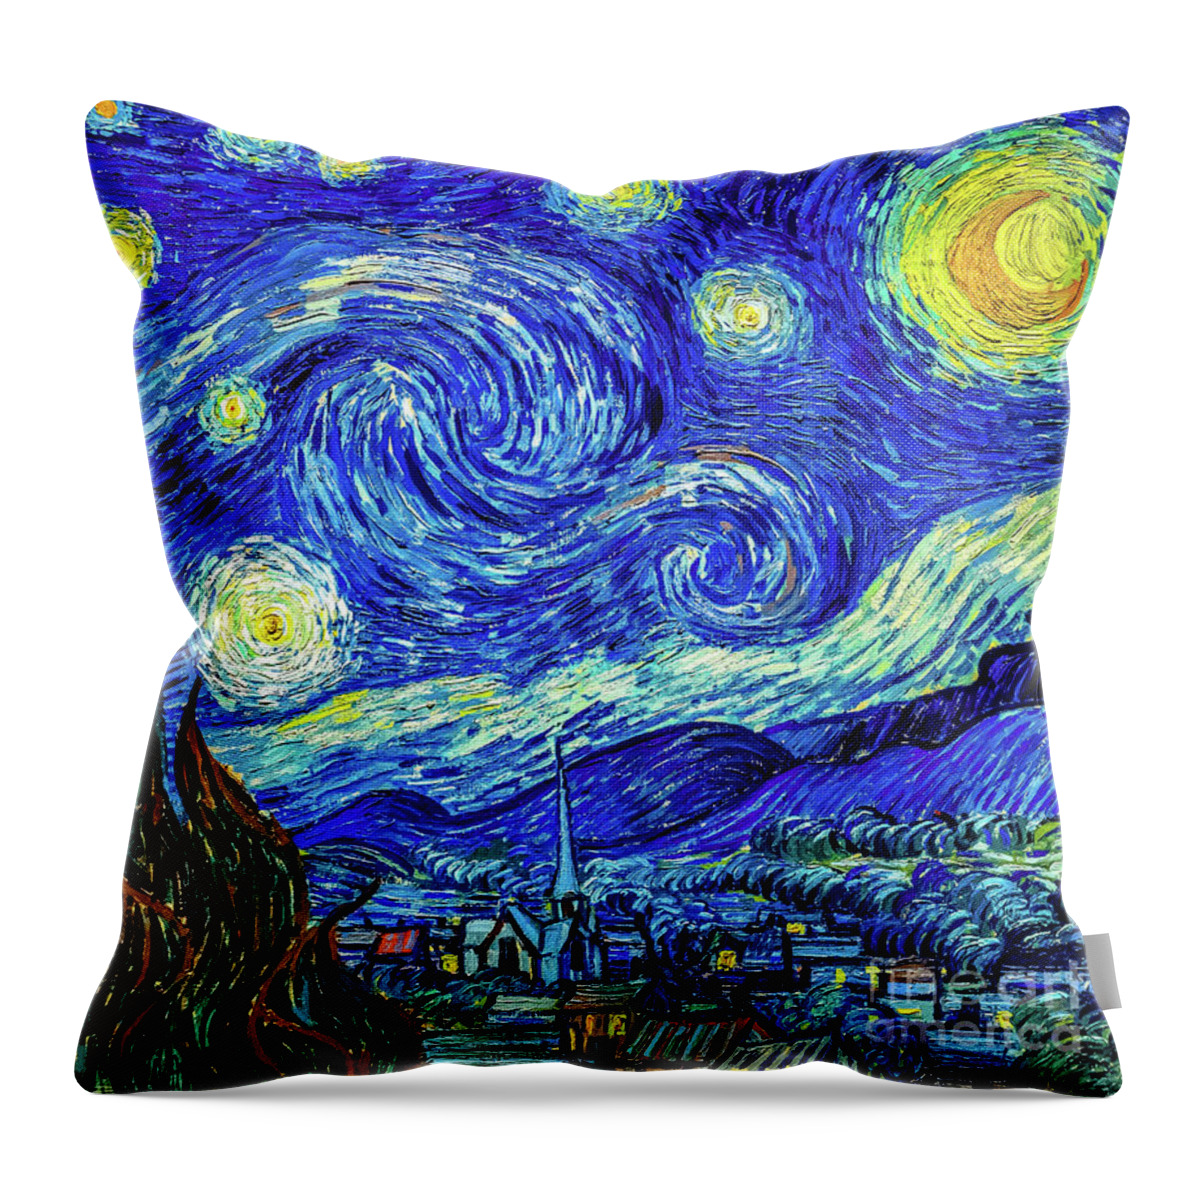 Starry Throw Pillow featuring the painting Starry Night by Vincent Van Gogh by Vincent Van Gogh